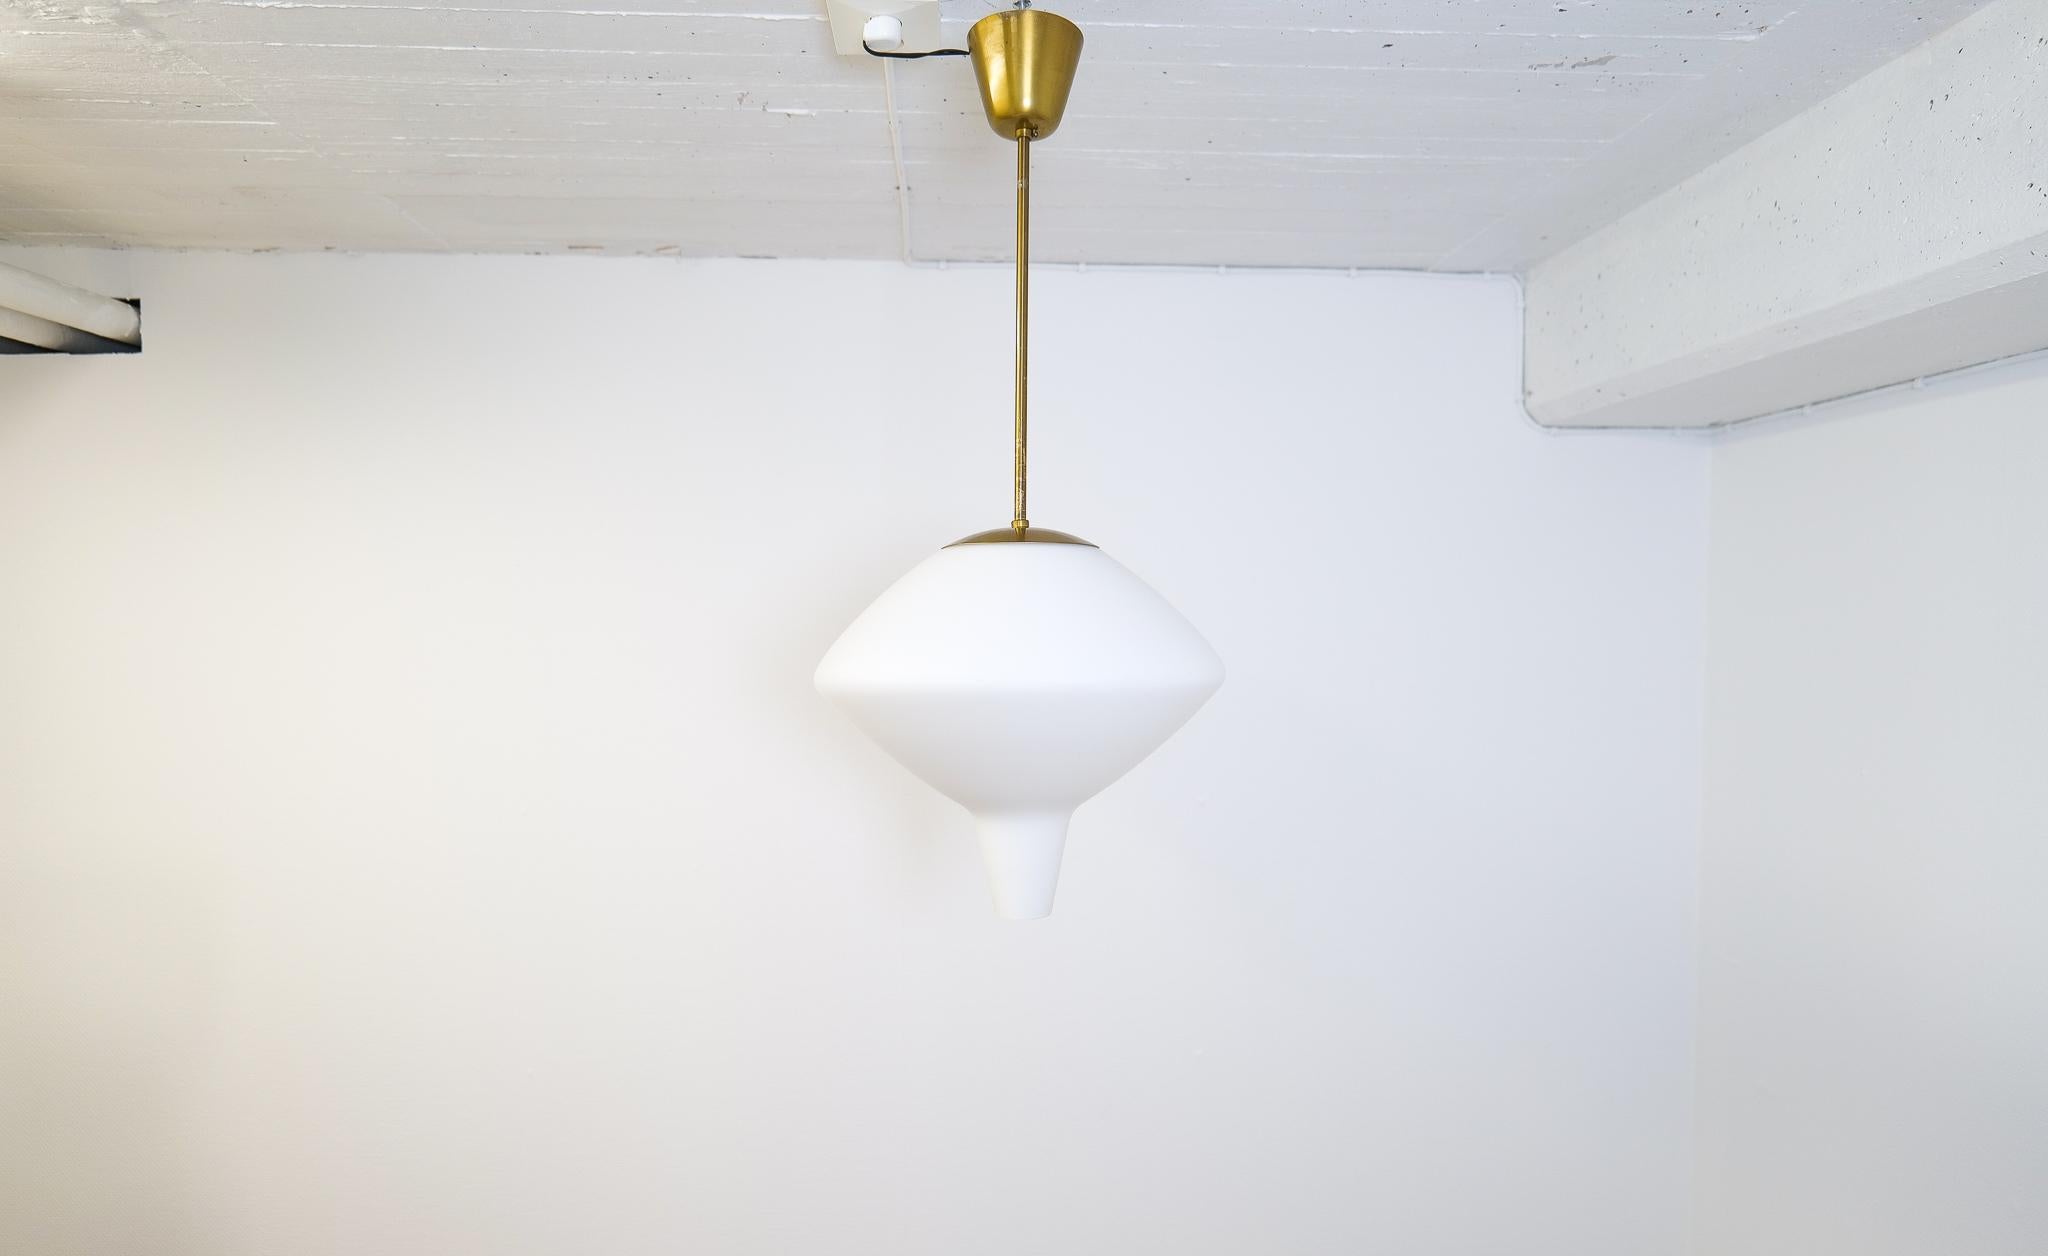 This large glass pendant was produced by ASEA, Sweden, 1940-1950s. The opaline glass shaped this way gives a great impression and is unusual to find. 

Good vintage condition

Dimension: The glass H 36cm, D 35cm total the rod height 42 cm. Total